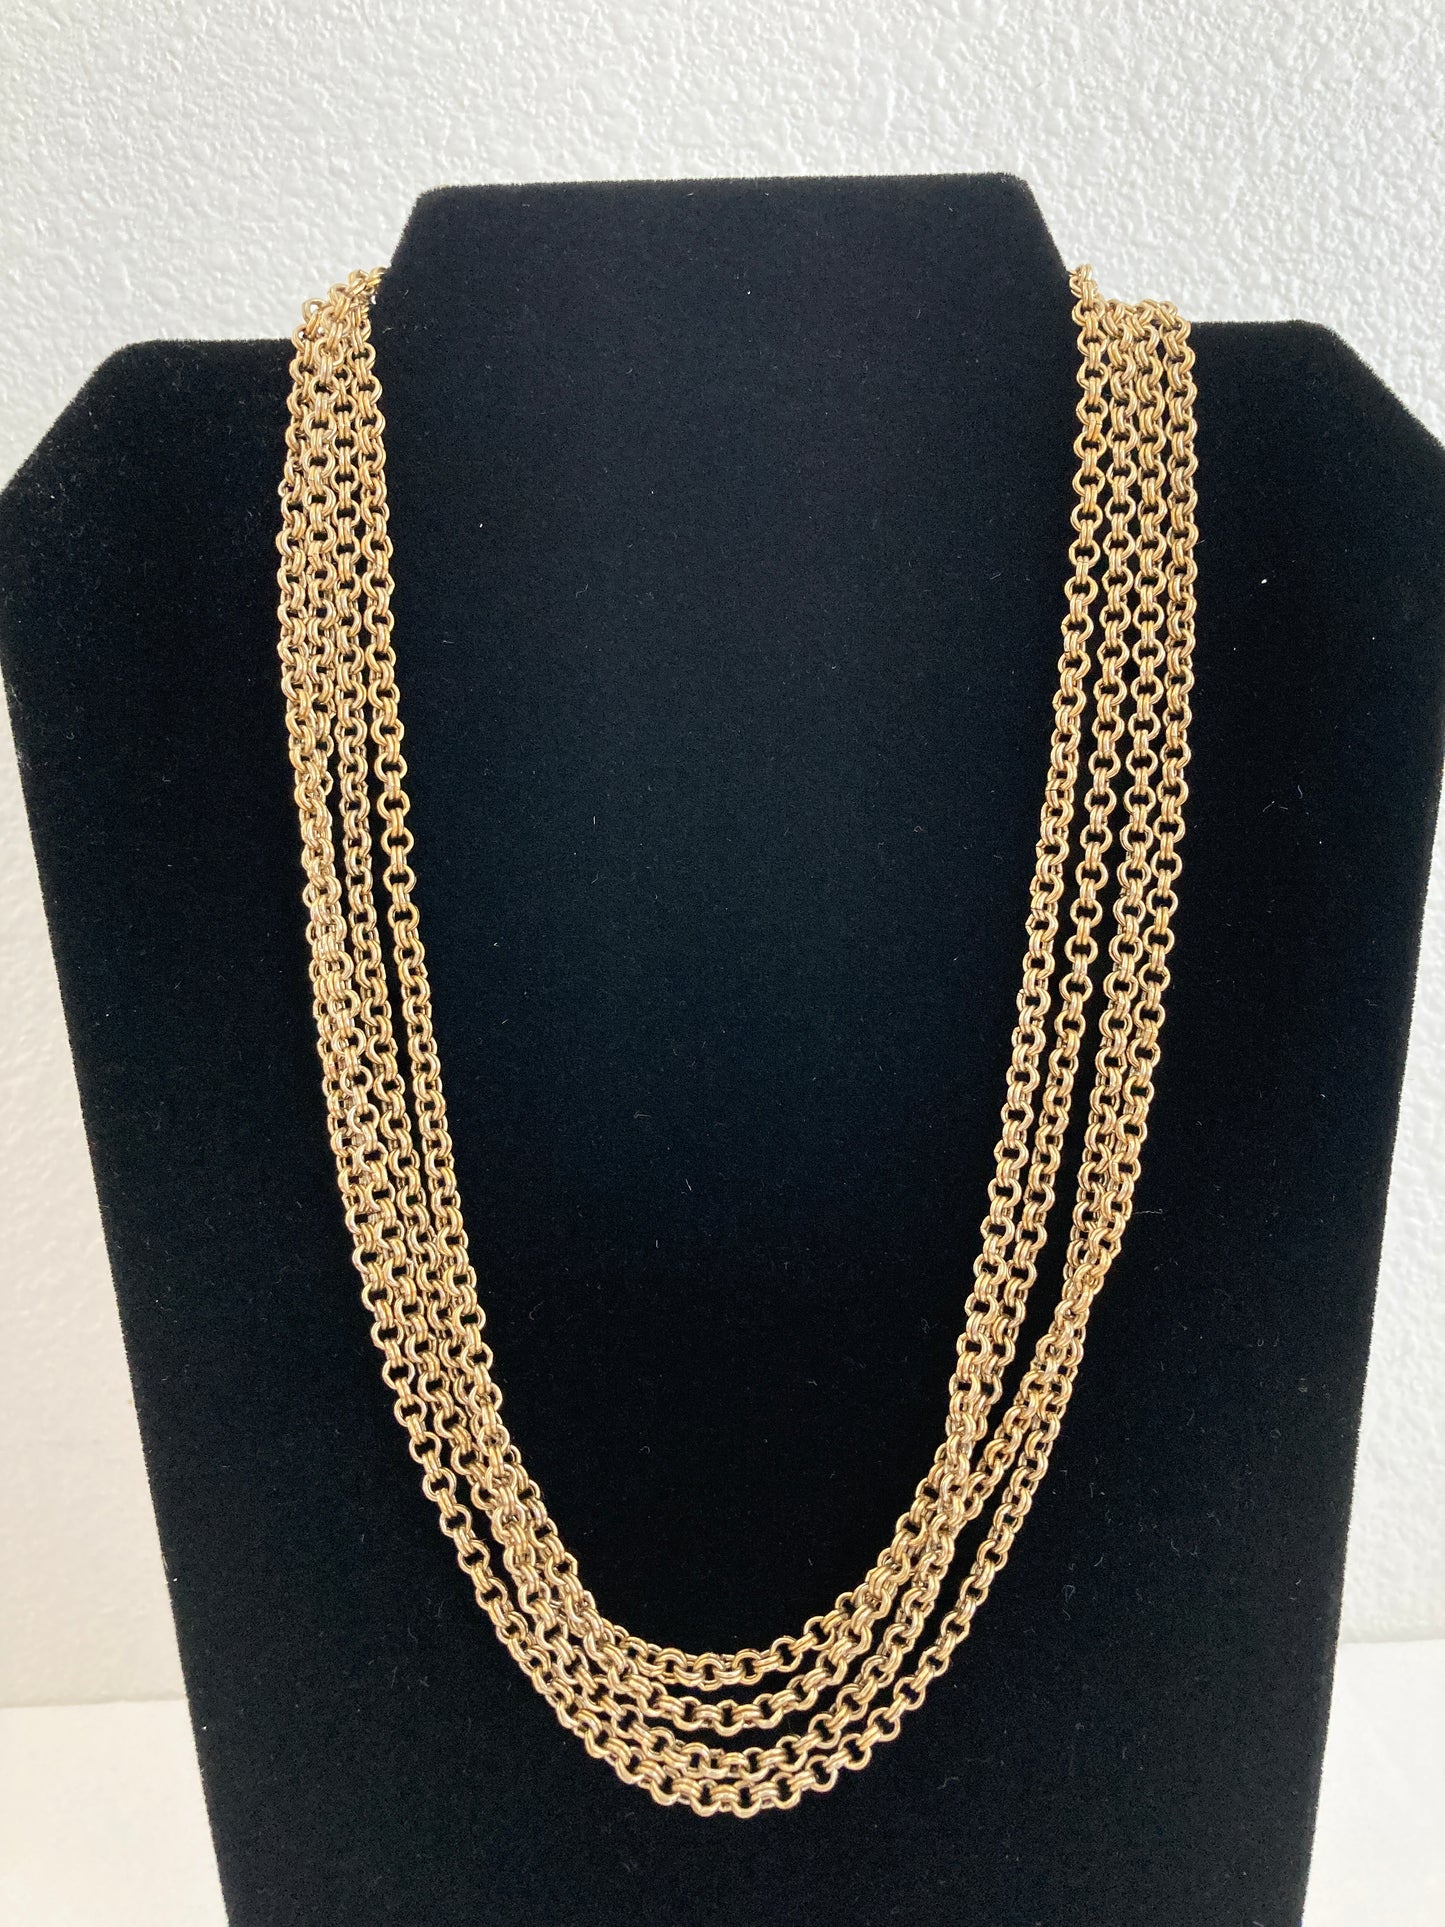 Super Long Double Link Chain Necklace 87 inches